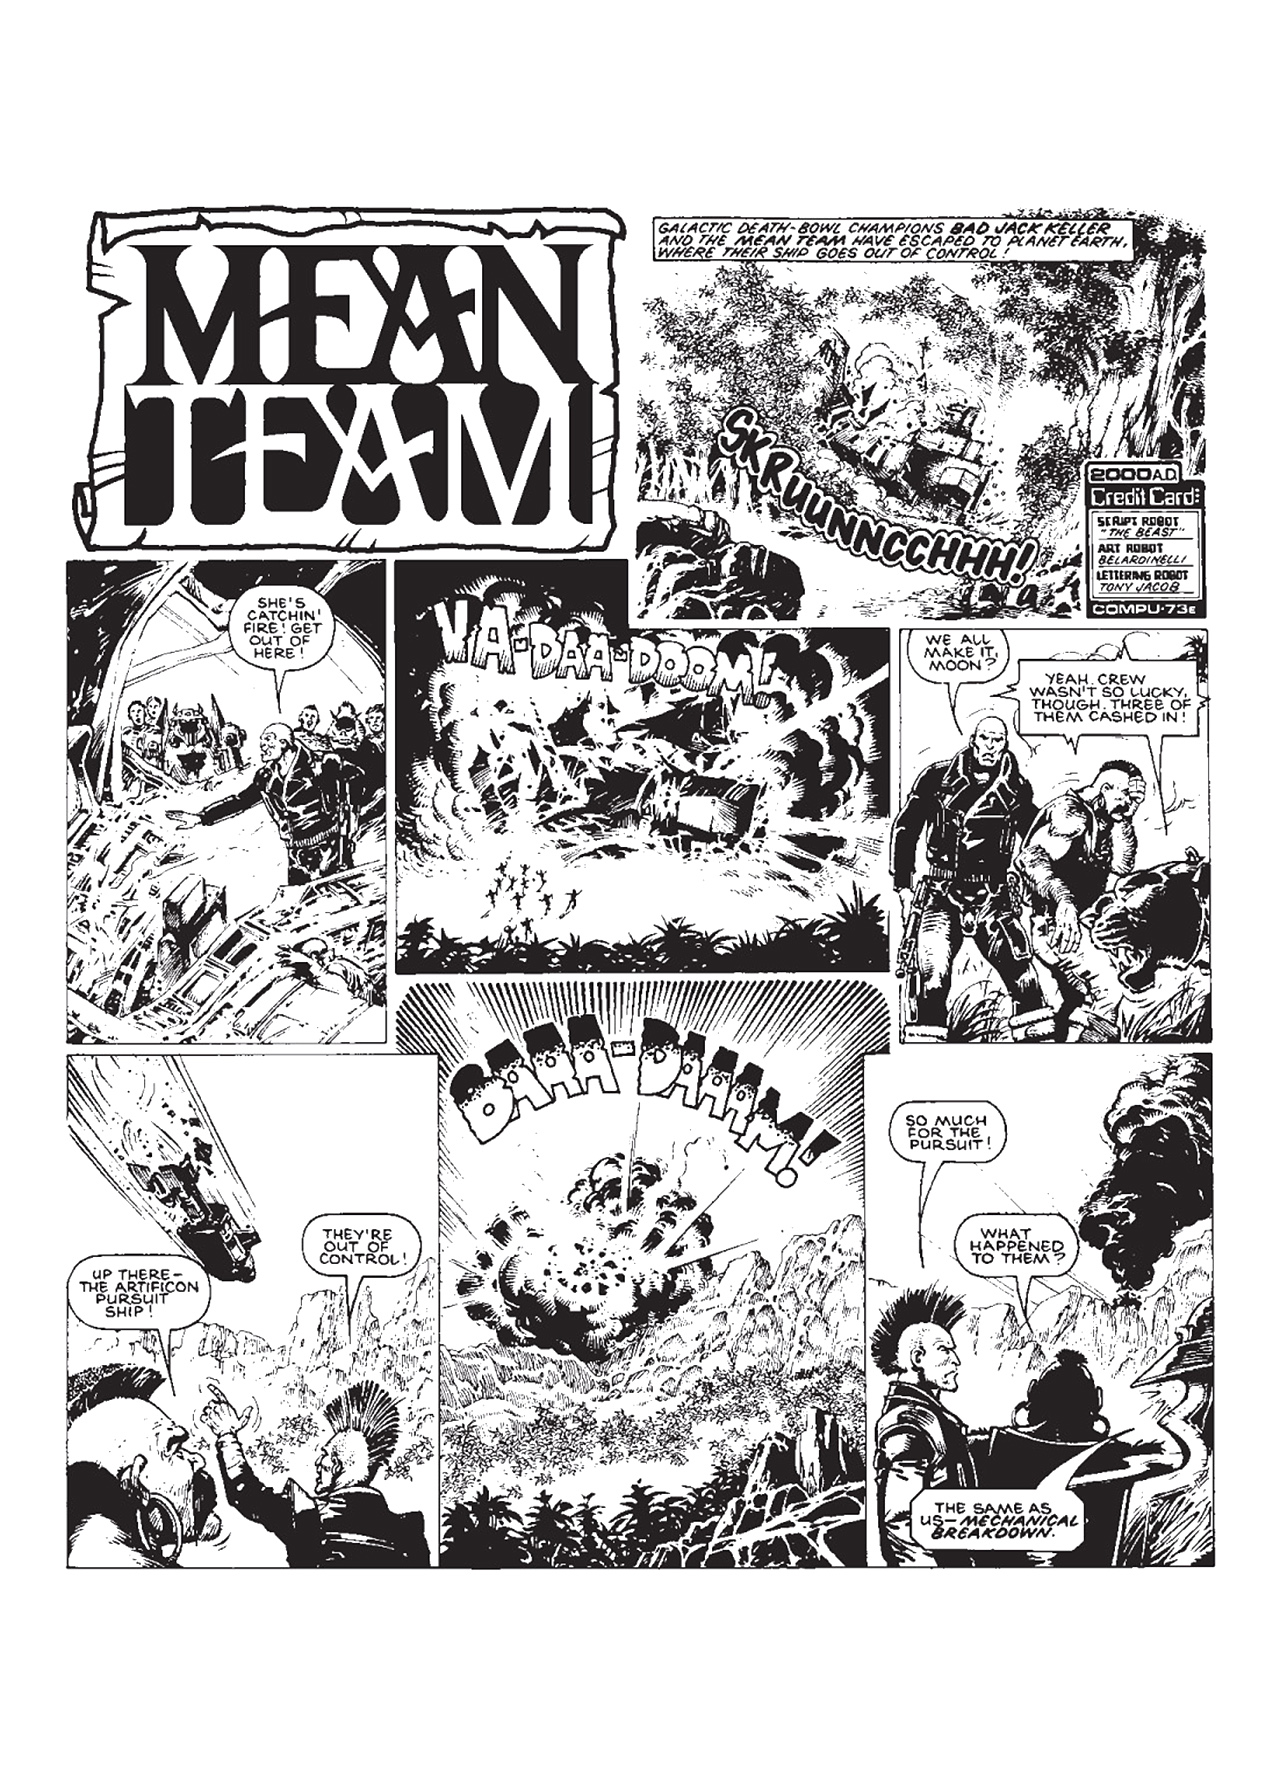 Read online Mean Team comic -  Issue # TPB - 104